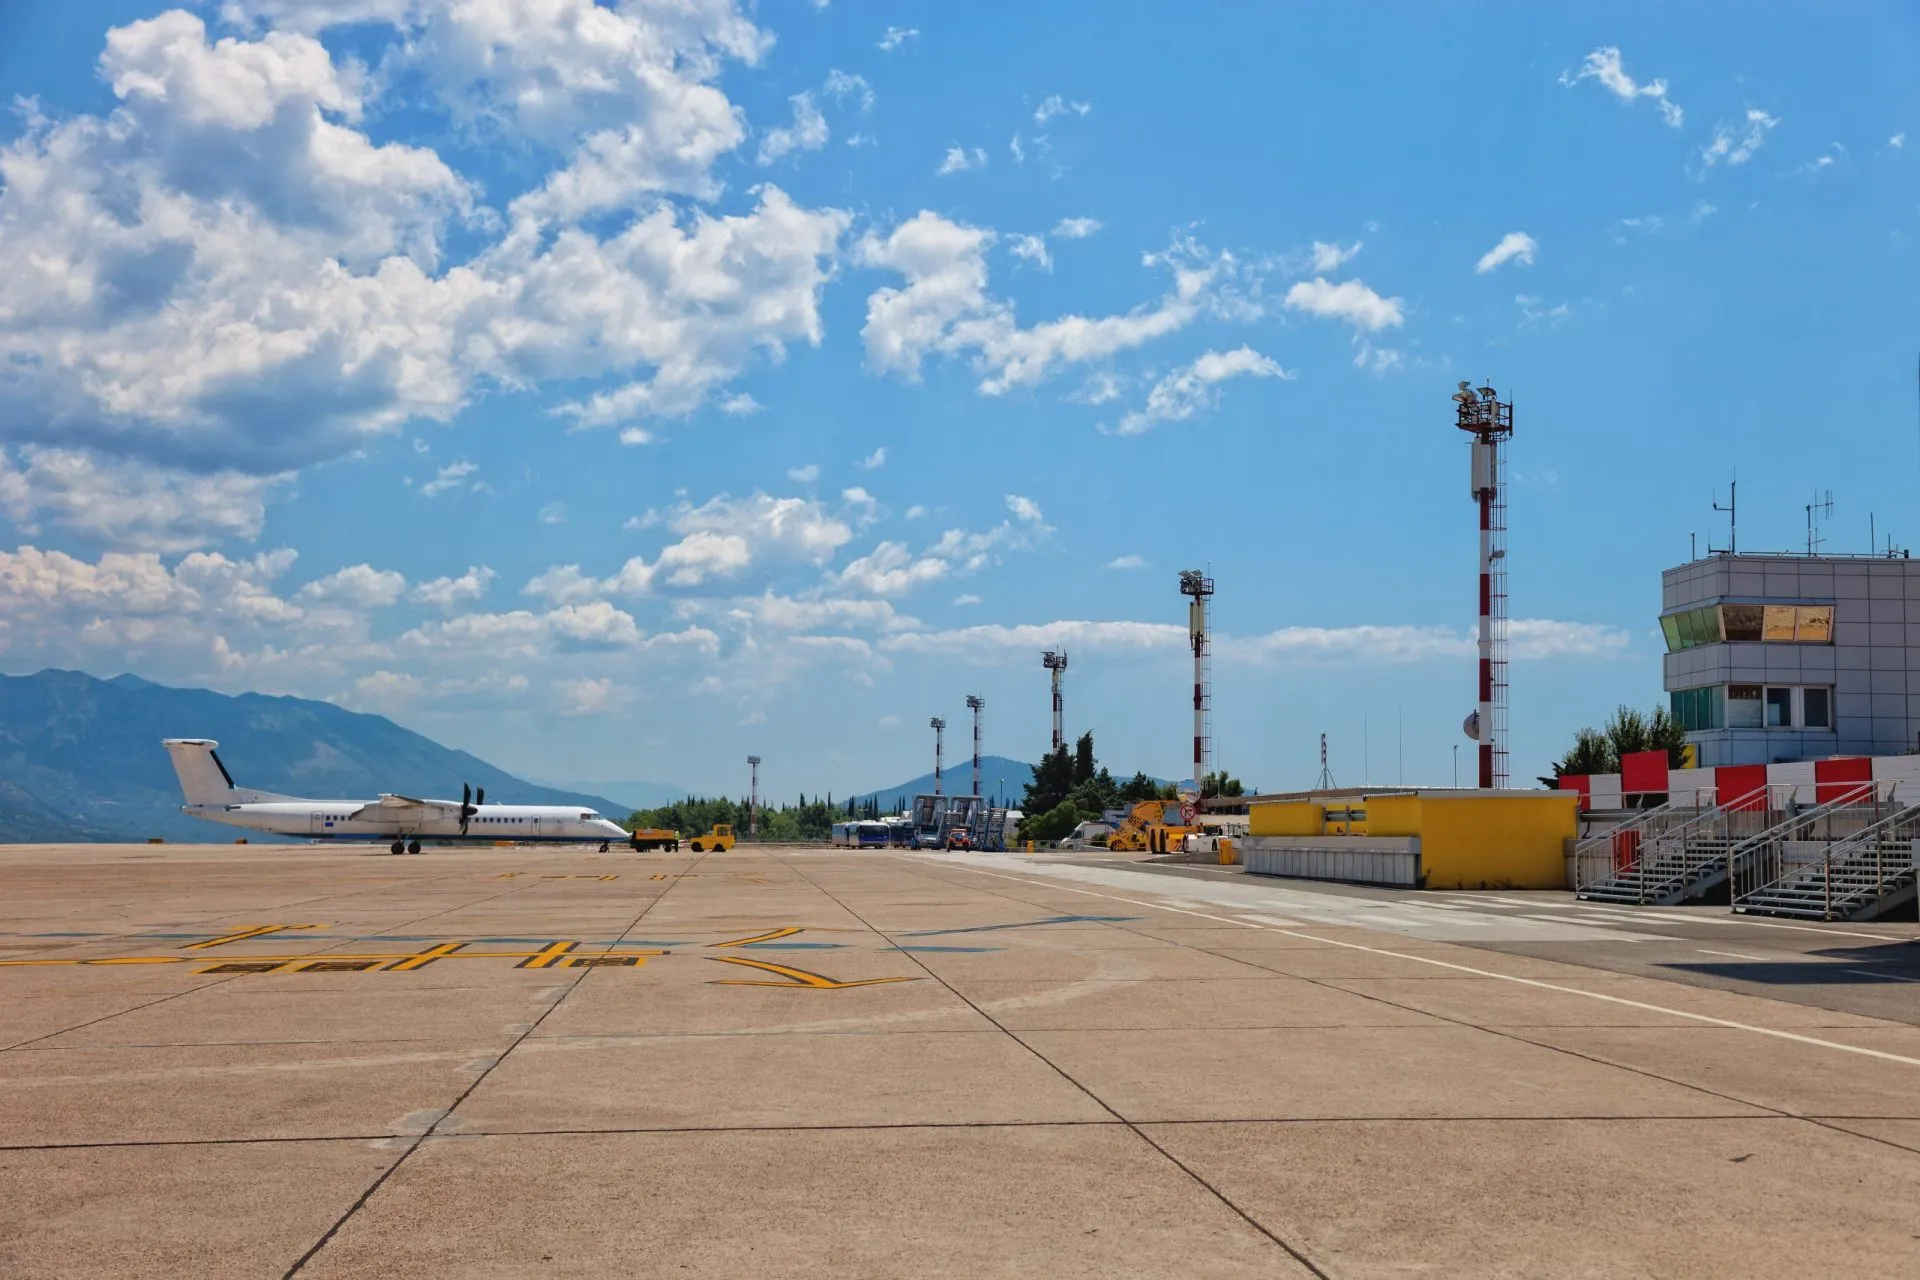 Aircraft parked on the runway on Dubrovnik Airport, Croatia